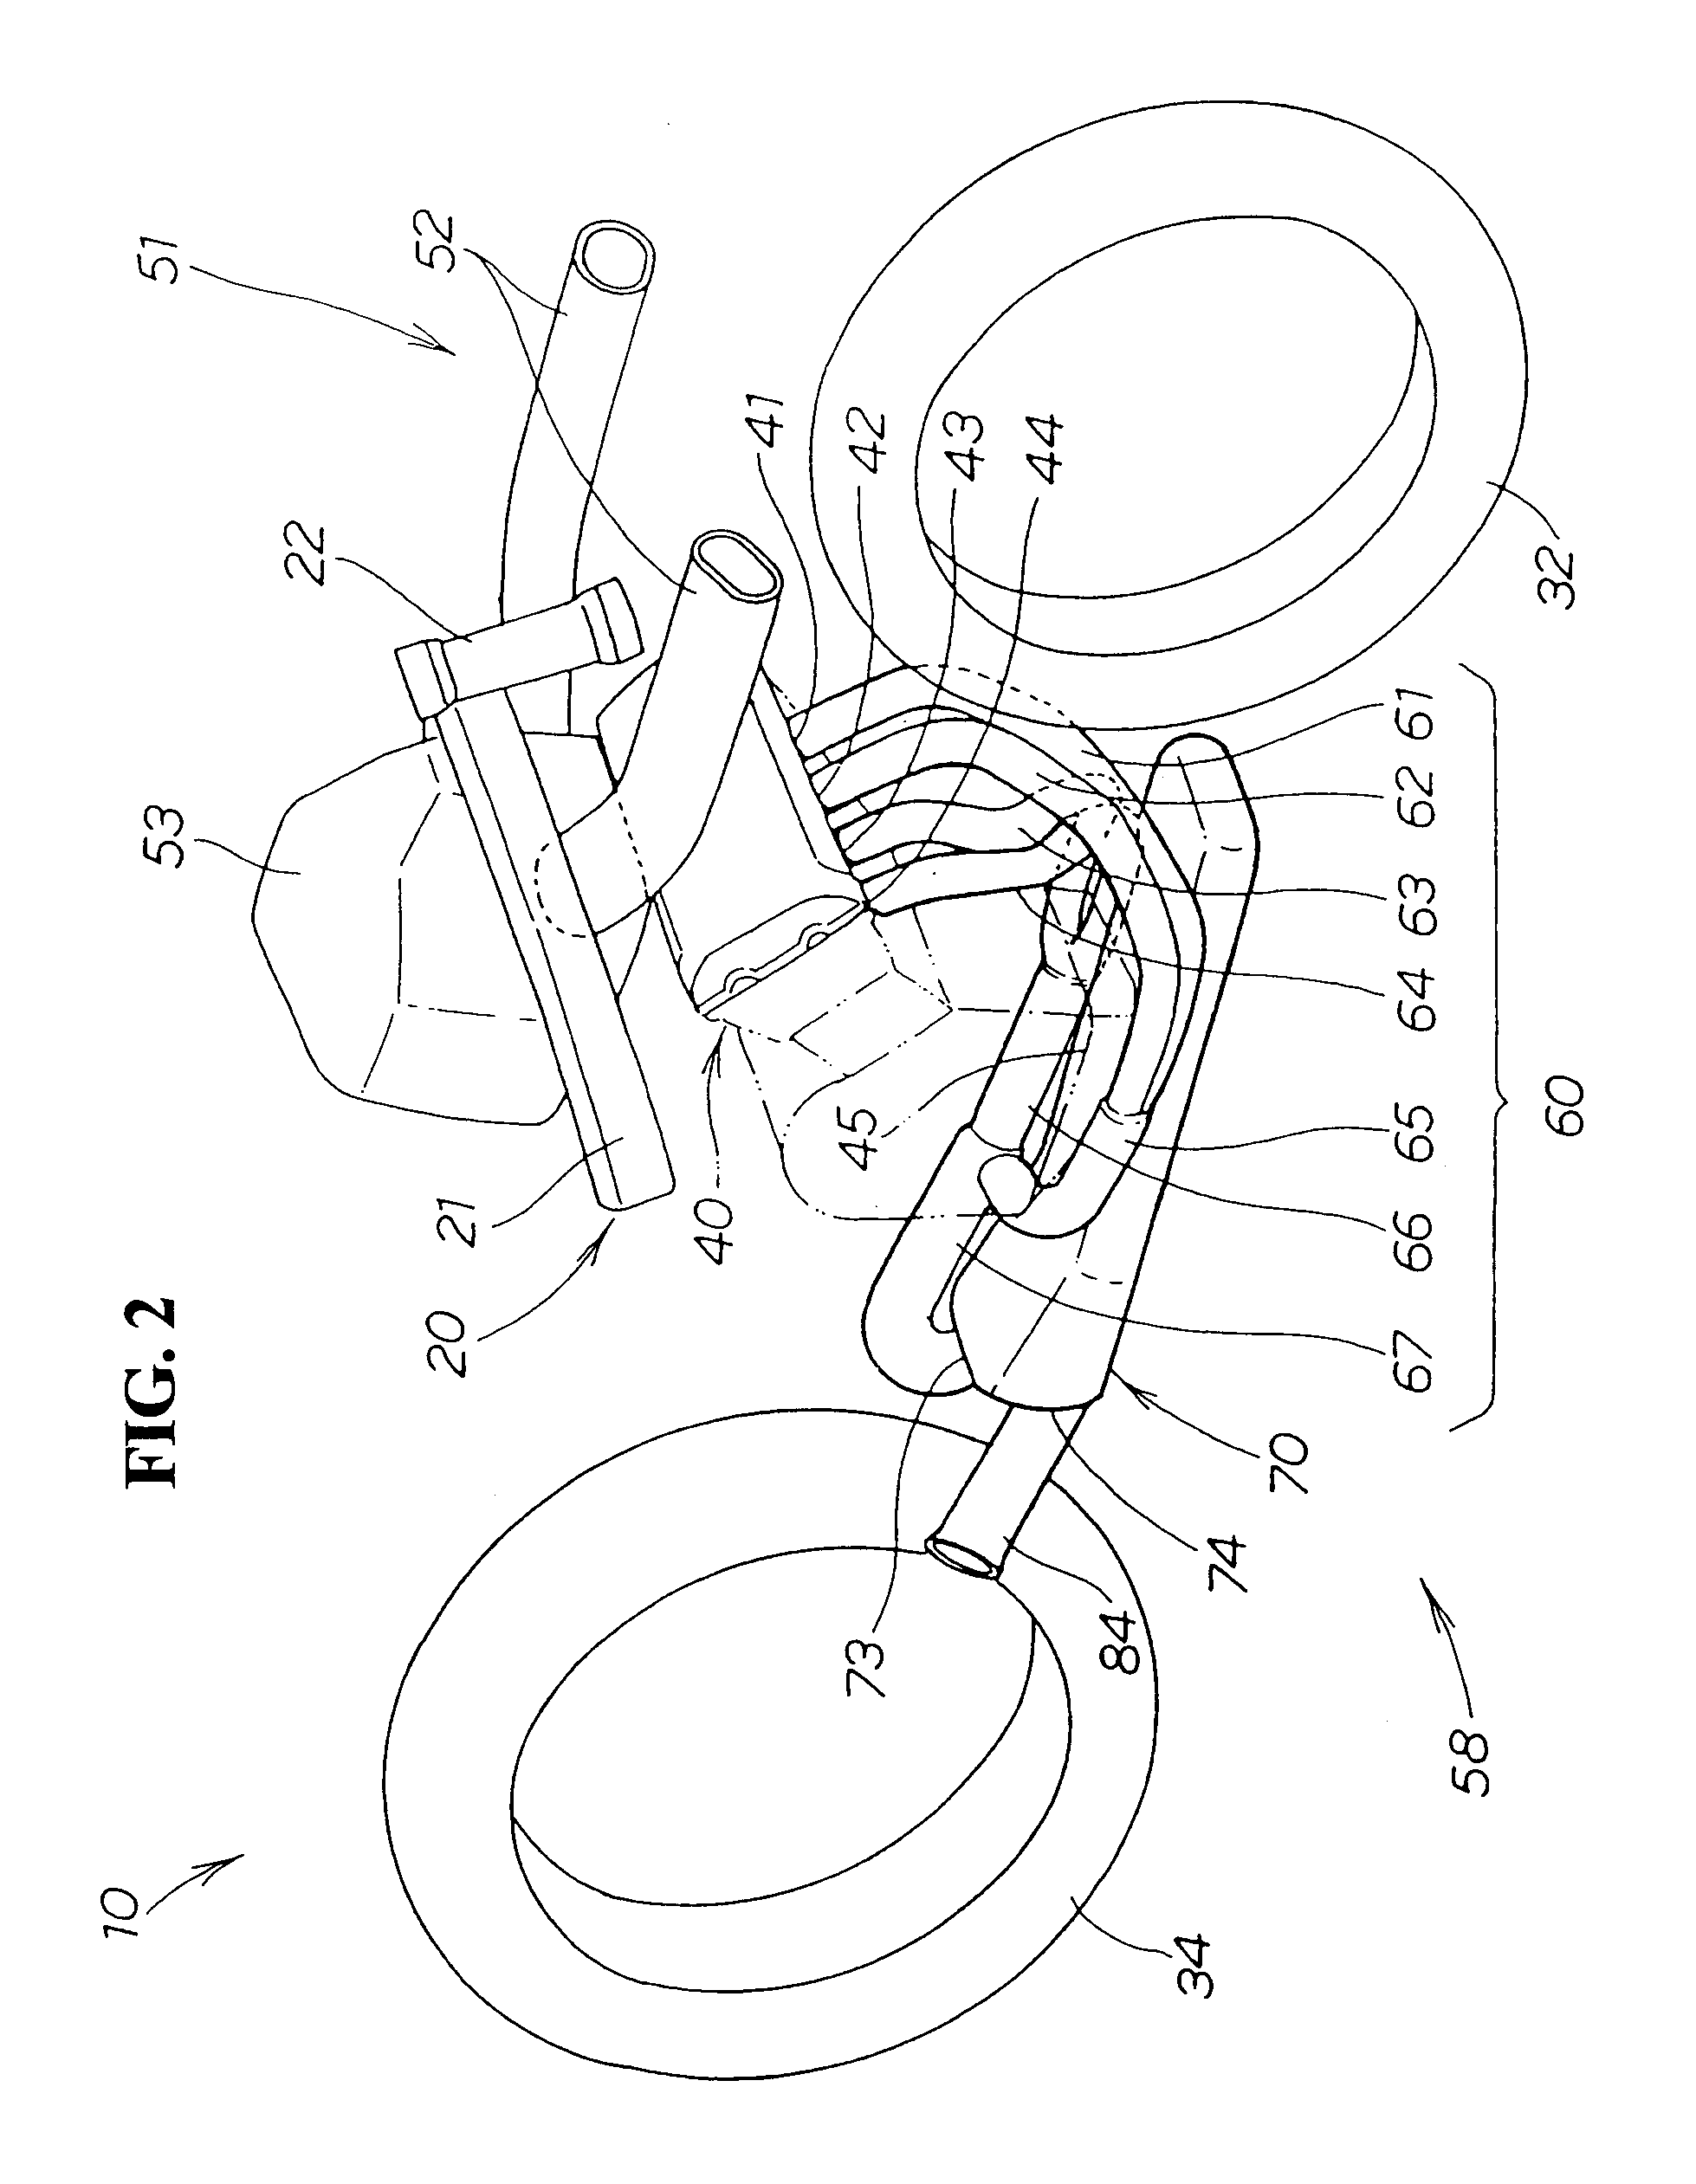 Exhaust system structure for motorcycle